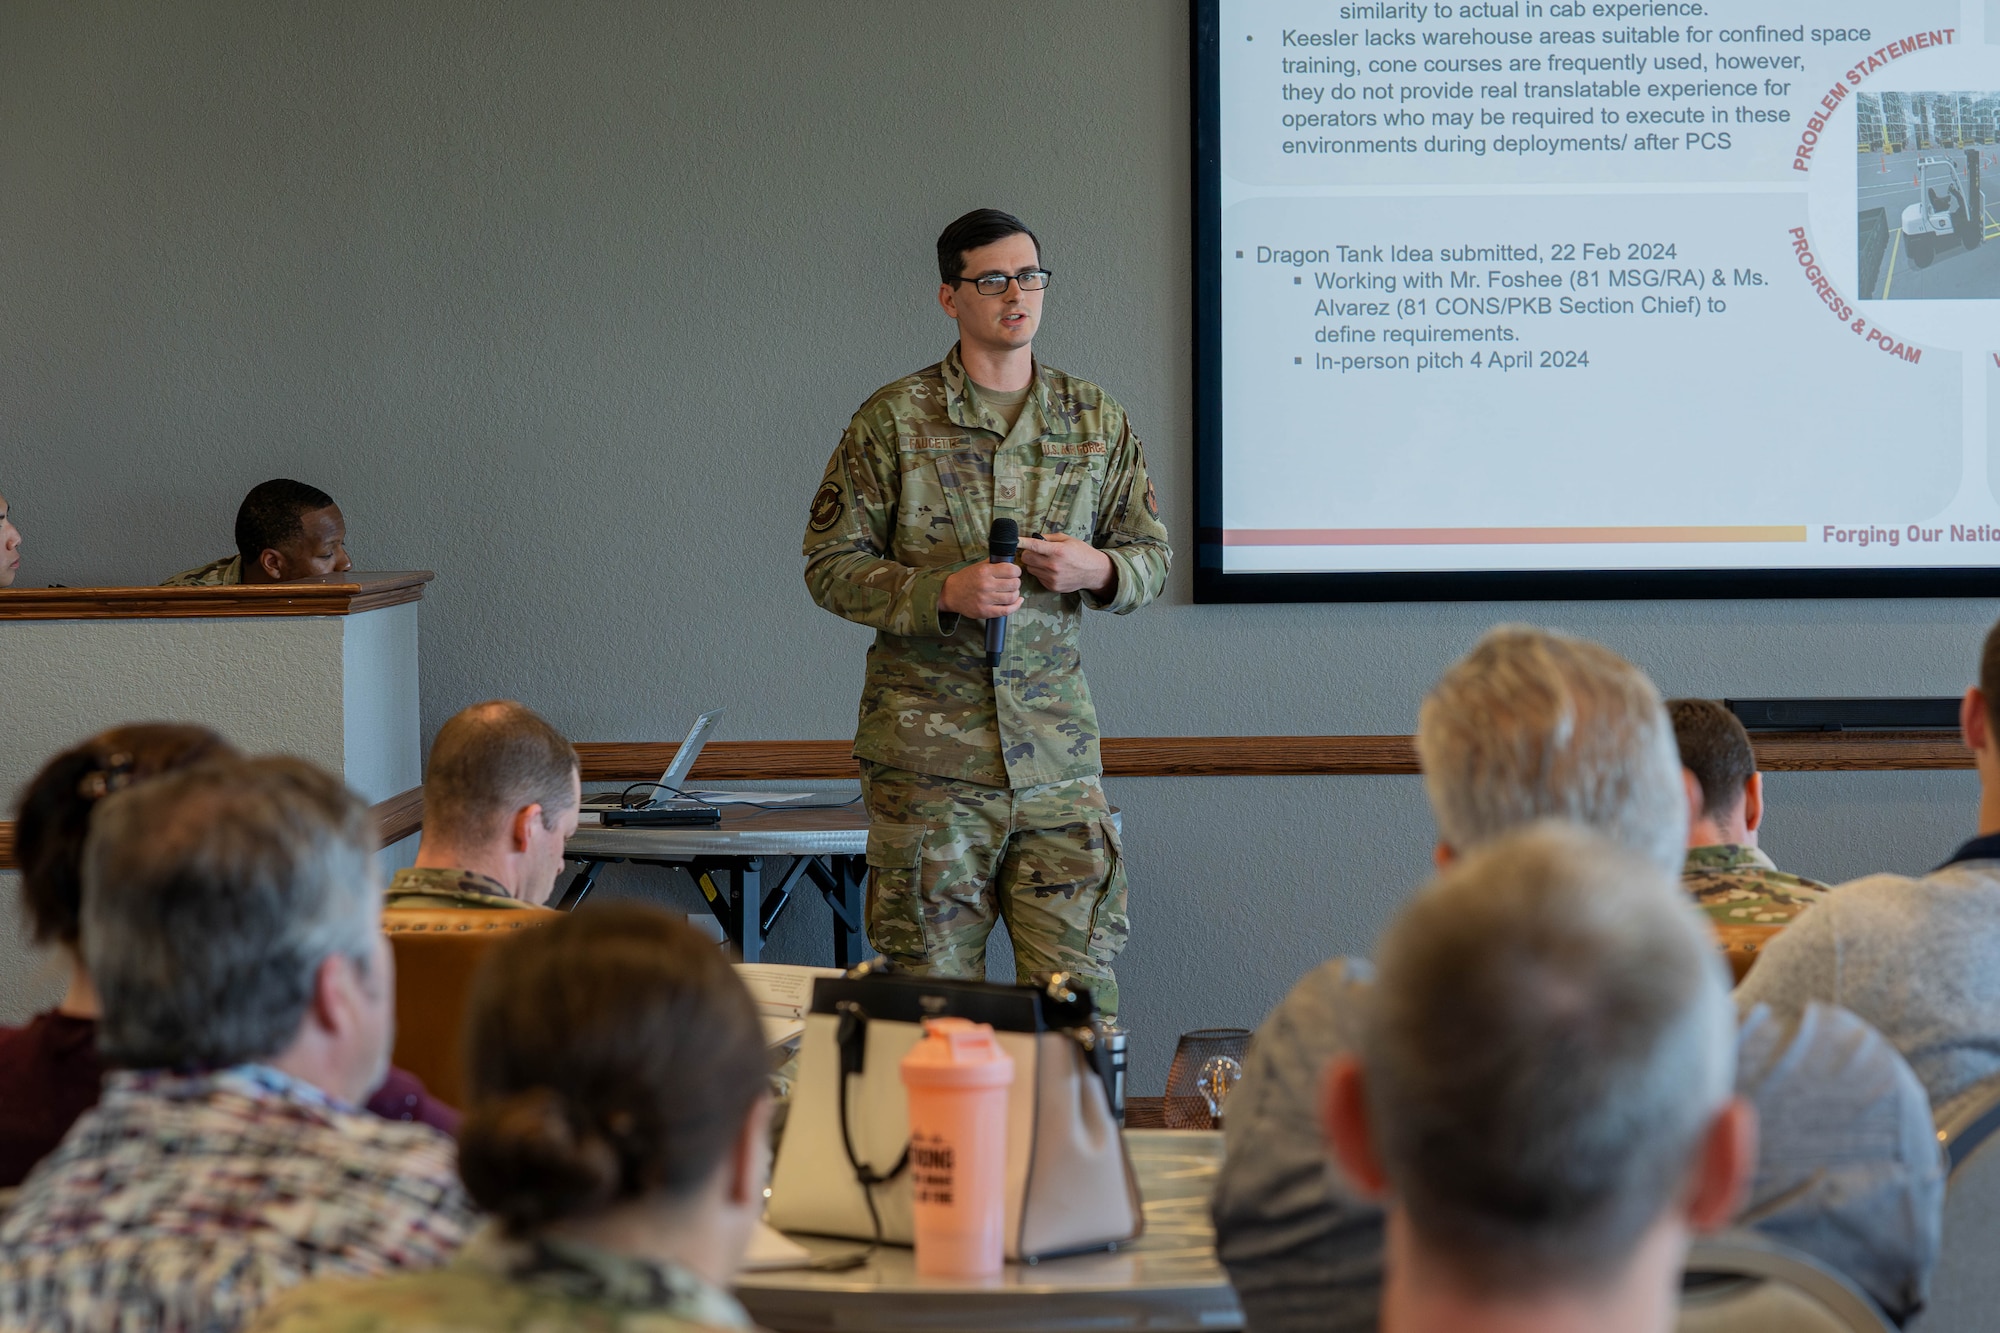 U.S. Air Force Tech. Sgt. Christopher Faucette, 81st Logistics Readiness Squadron NCO in charge, discusses the benefits of a forklift simulator for the Dragon Tank panel at Keesler Air Force Base, April 3, Mississippi, 2024.